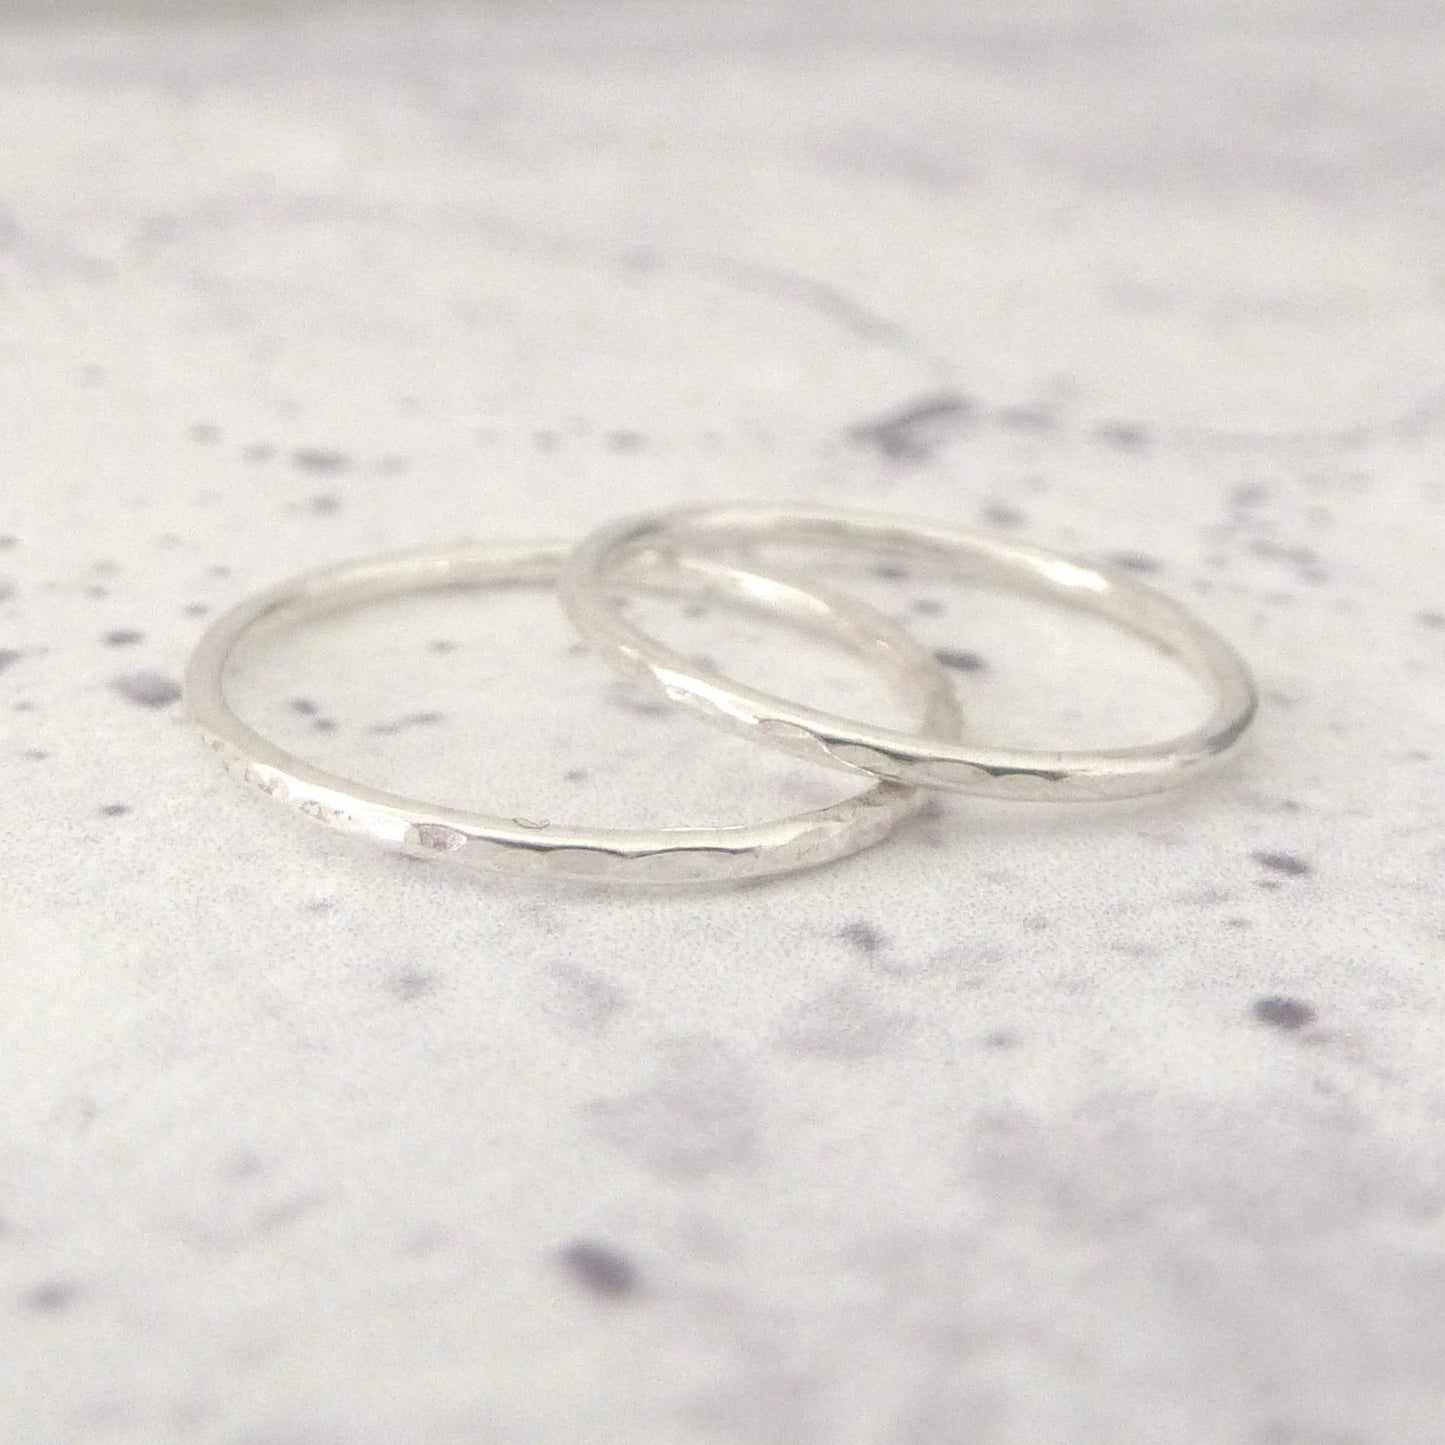 Skinny Band Rings - Sterling silver - Set of 3